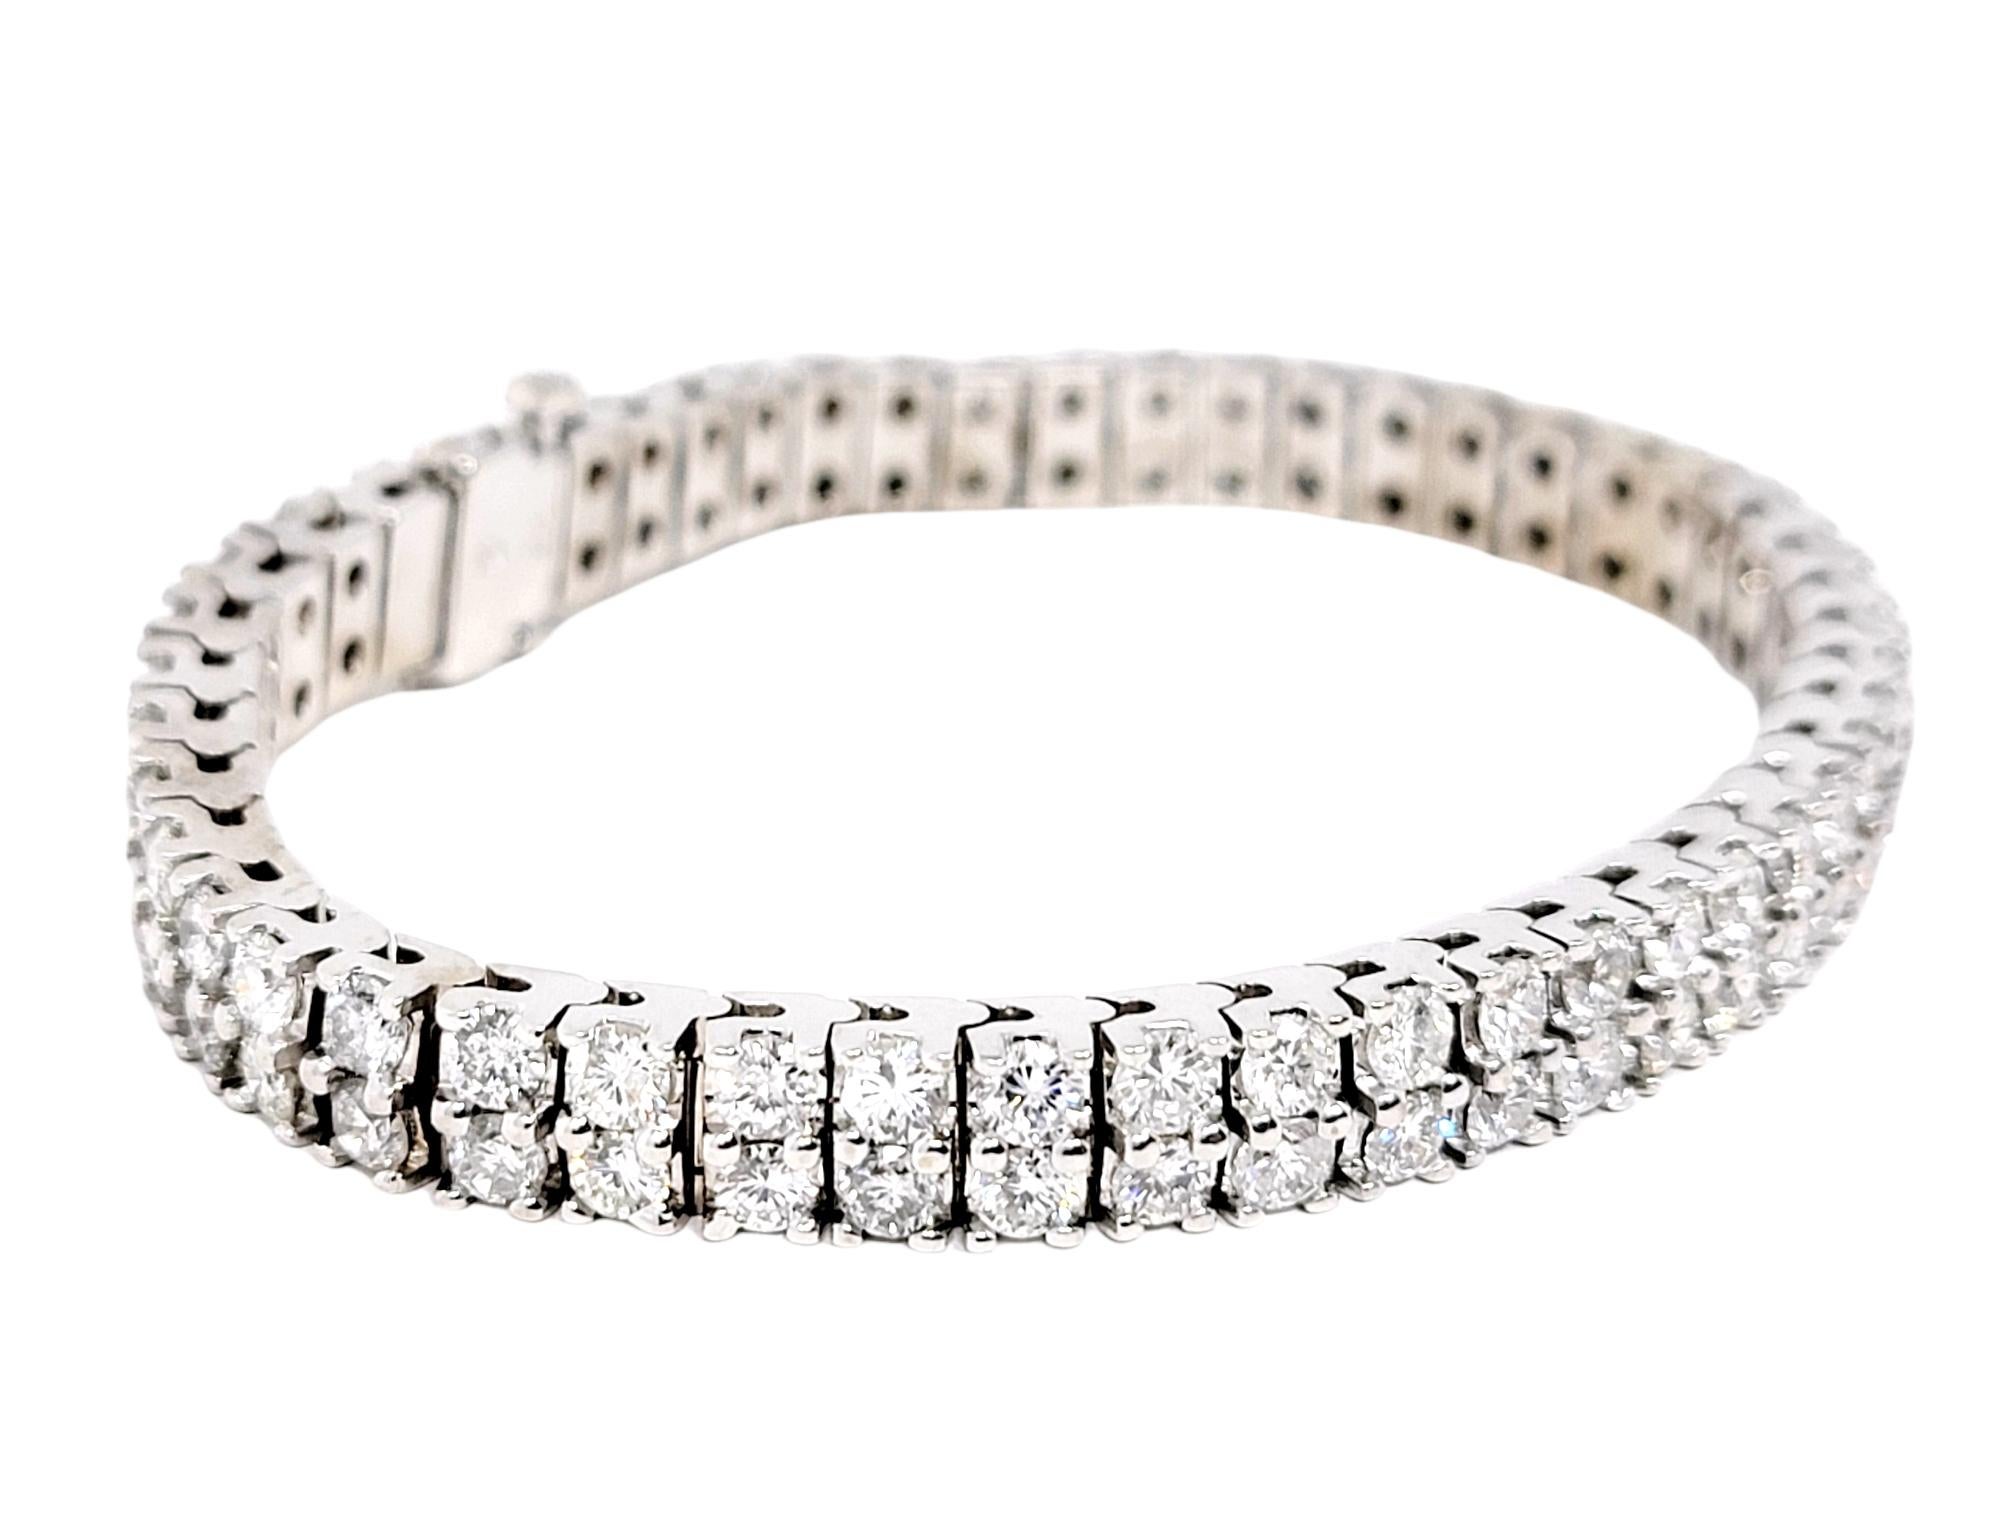 This super sparkly modern diamond tennis bracelet is simply stunning! The multi row design glitters and glows on the wrist, exuding contemporary elegance. Featuring 100 round brilliant diamonds dazzling throughout, the icy white stones really pop